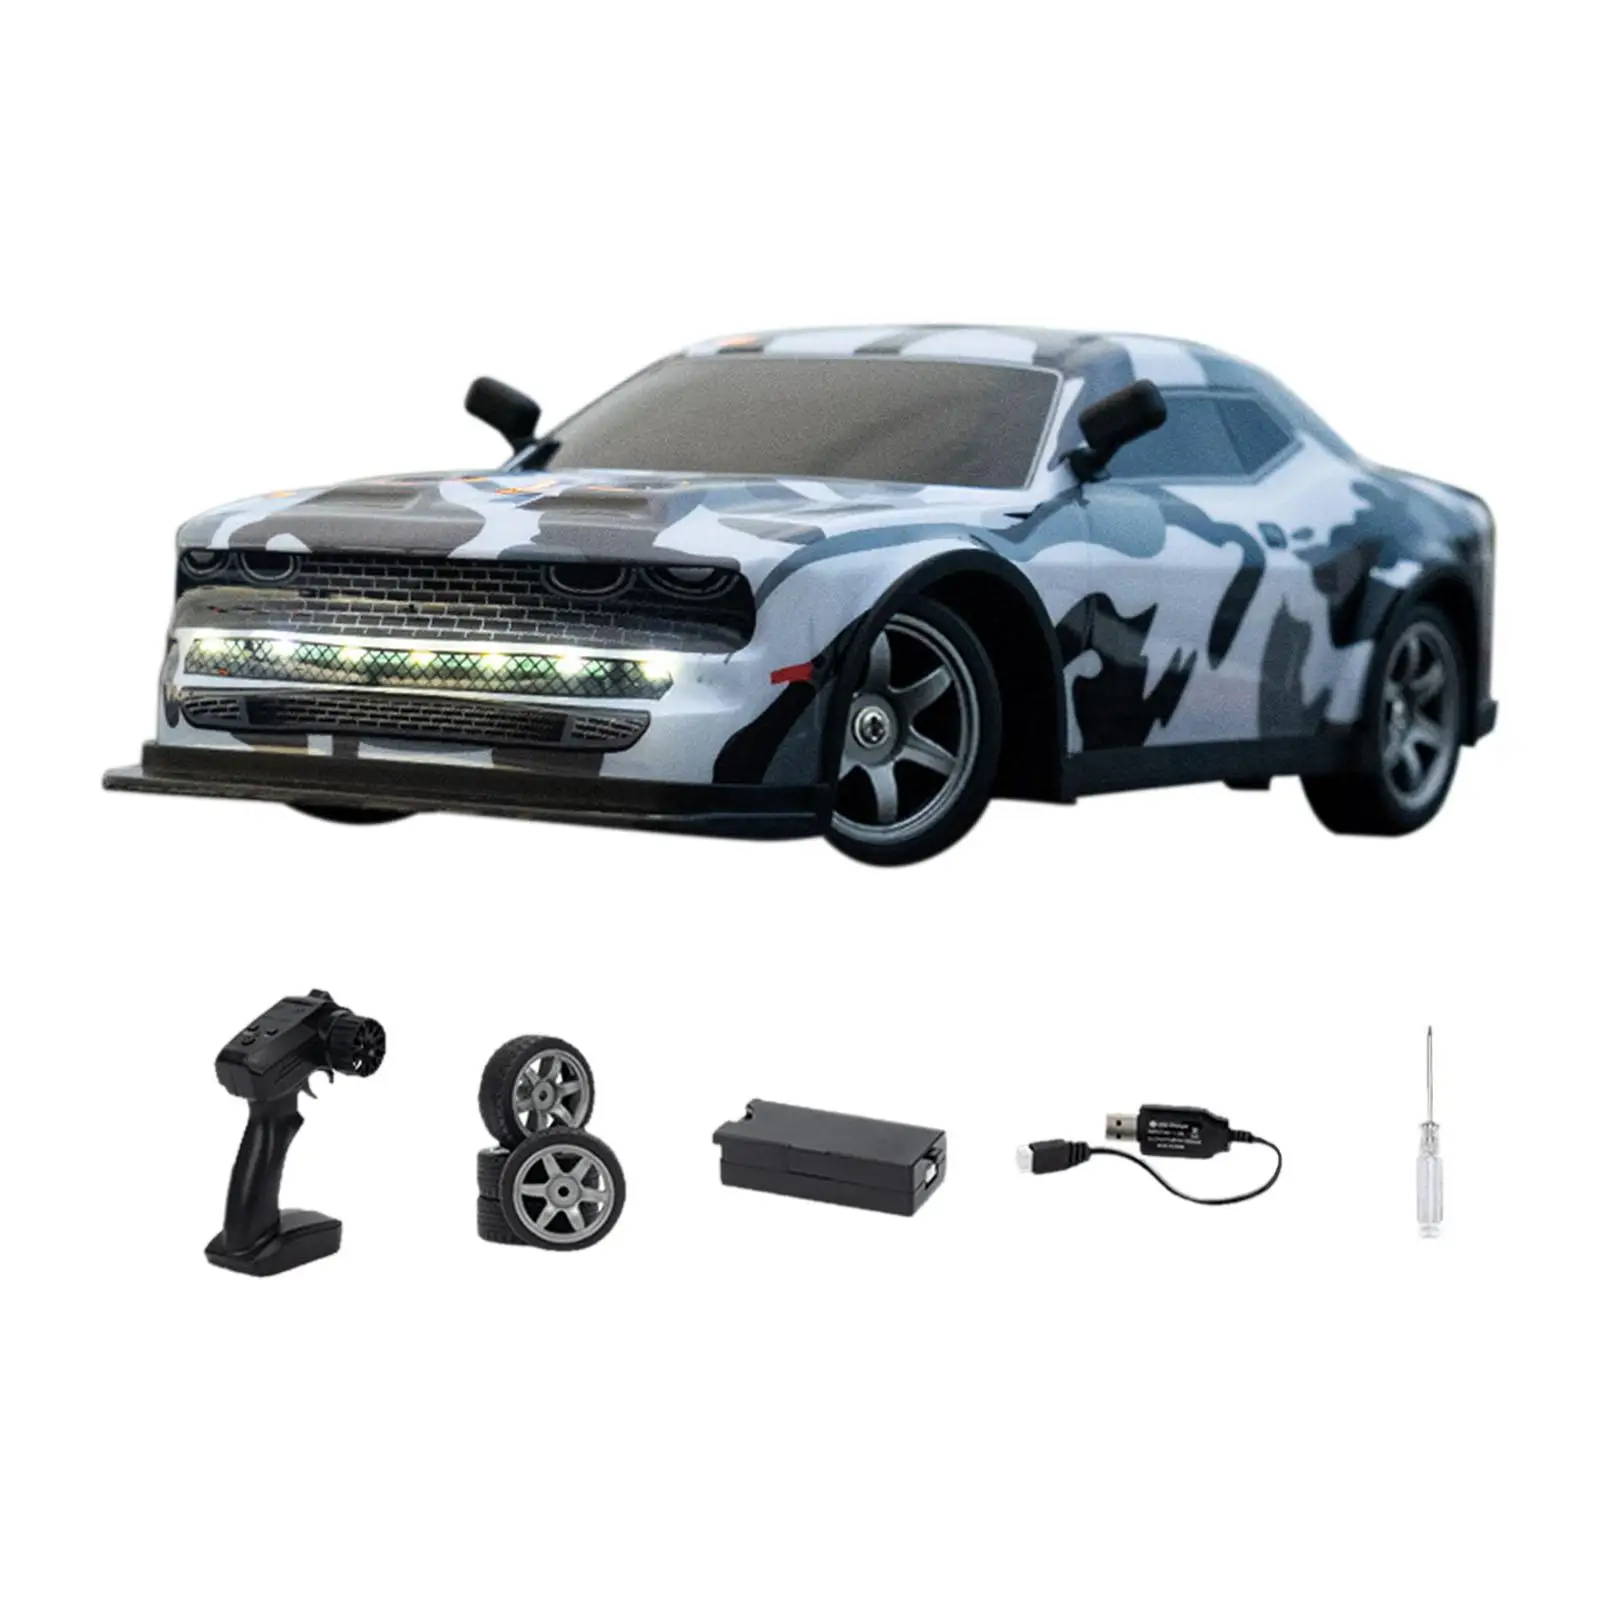 1:16 Scale RC Drift Car RTR High Speed Car for Party Favors Christmas Gift